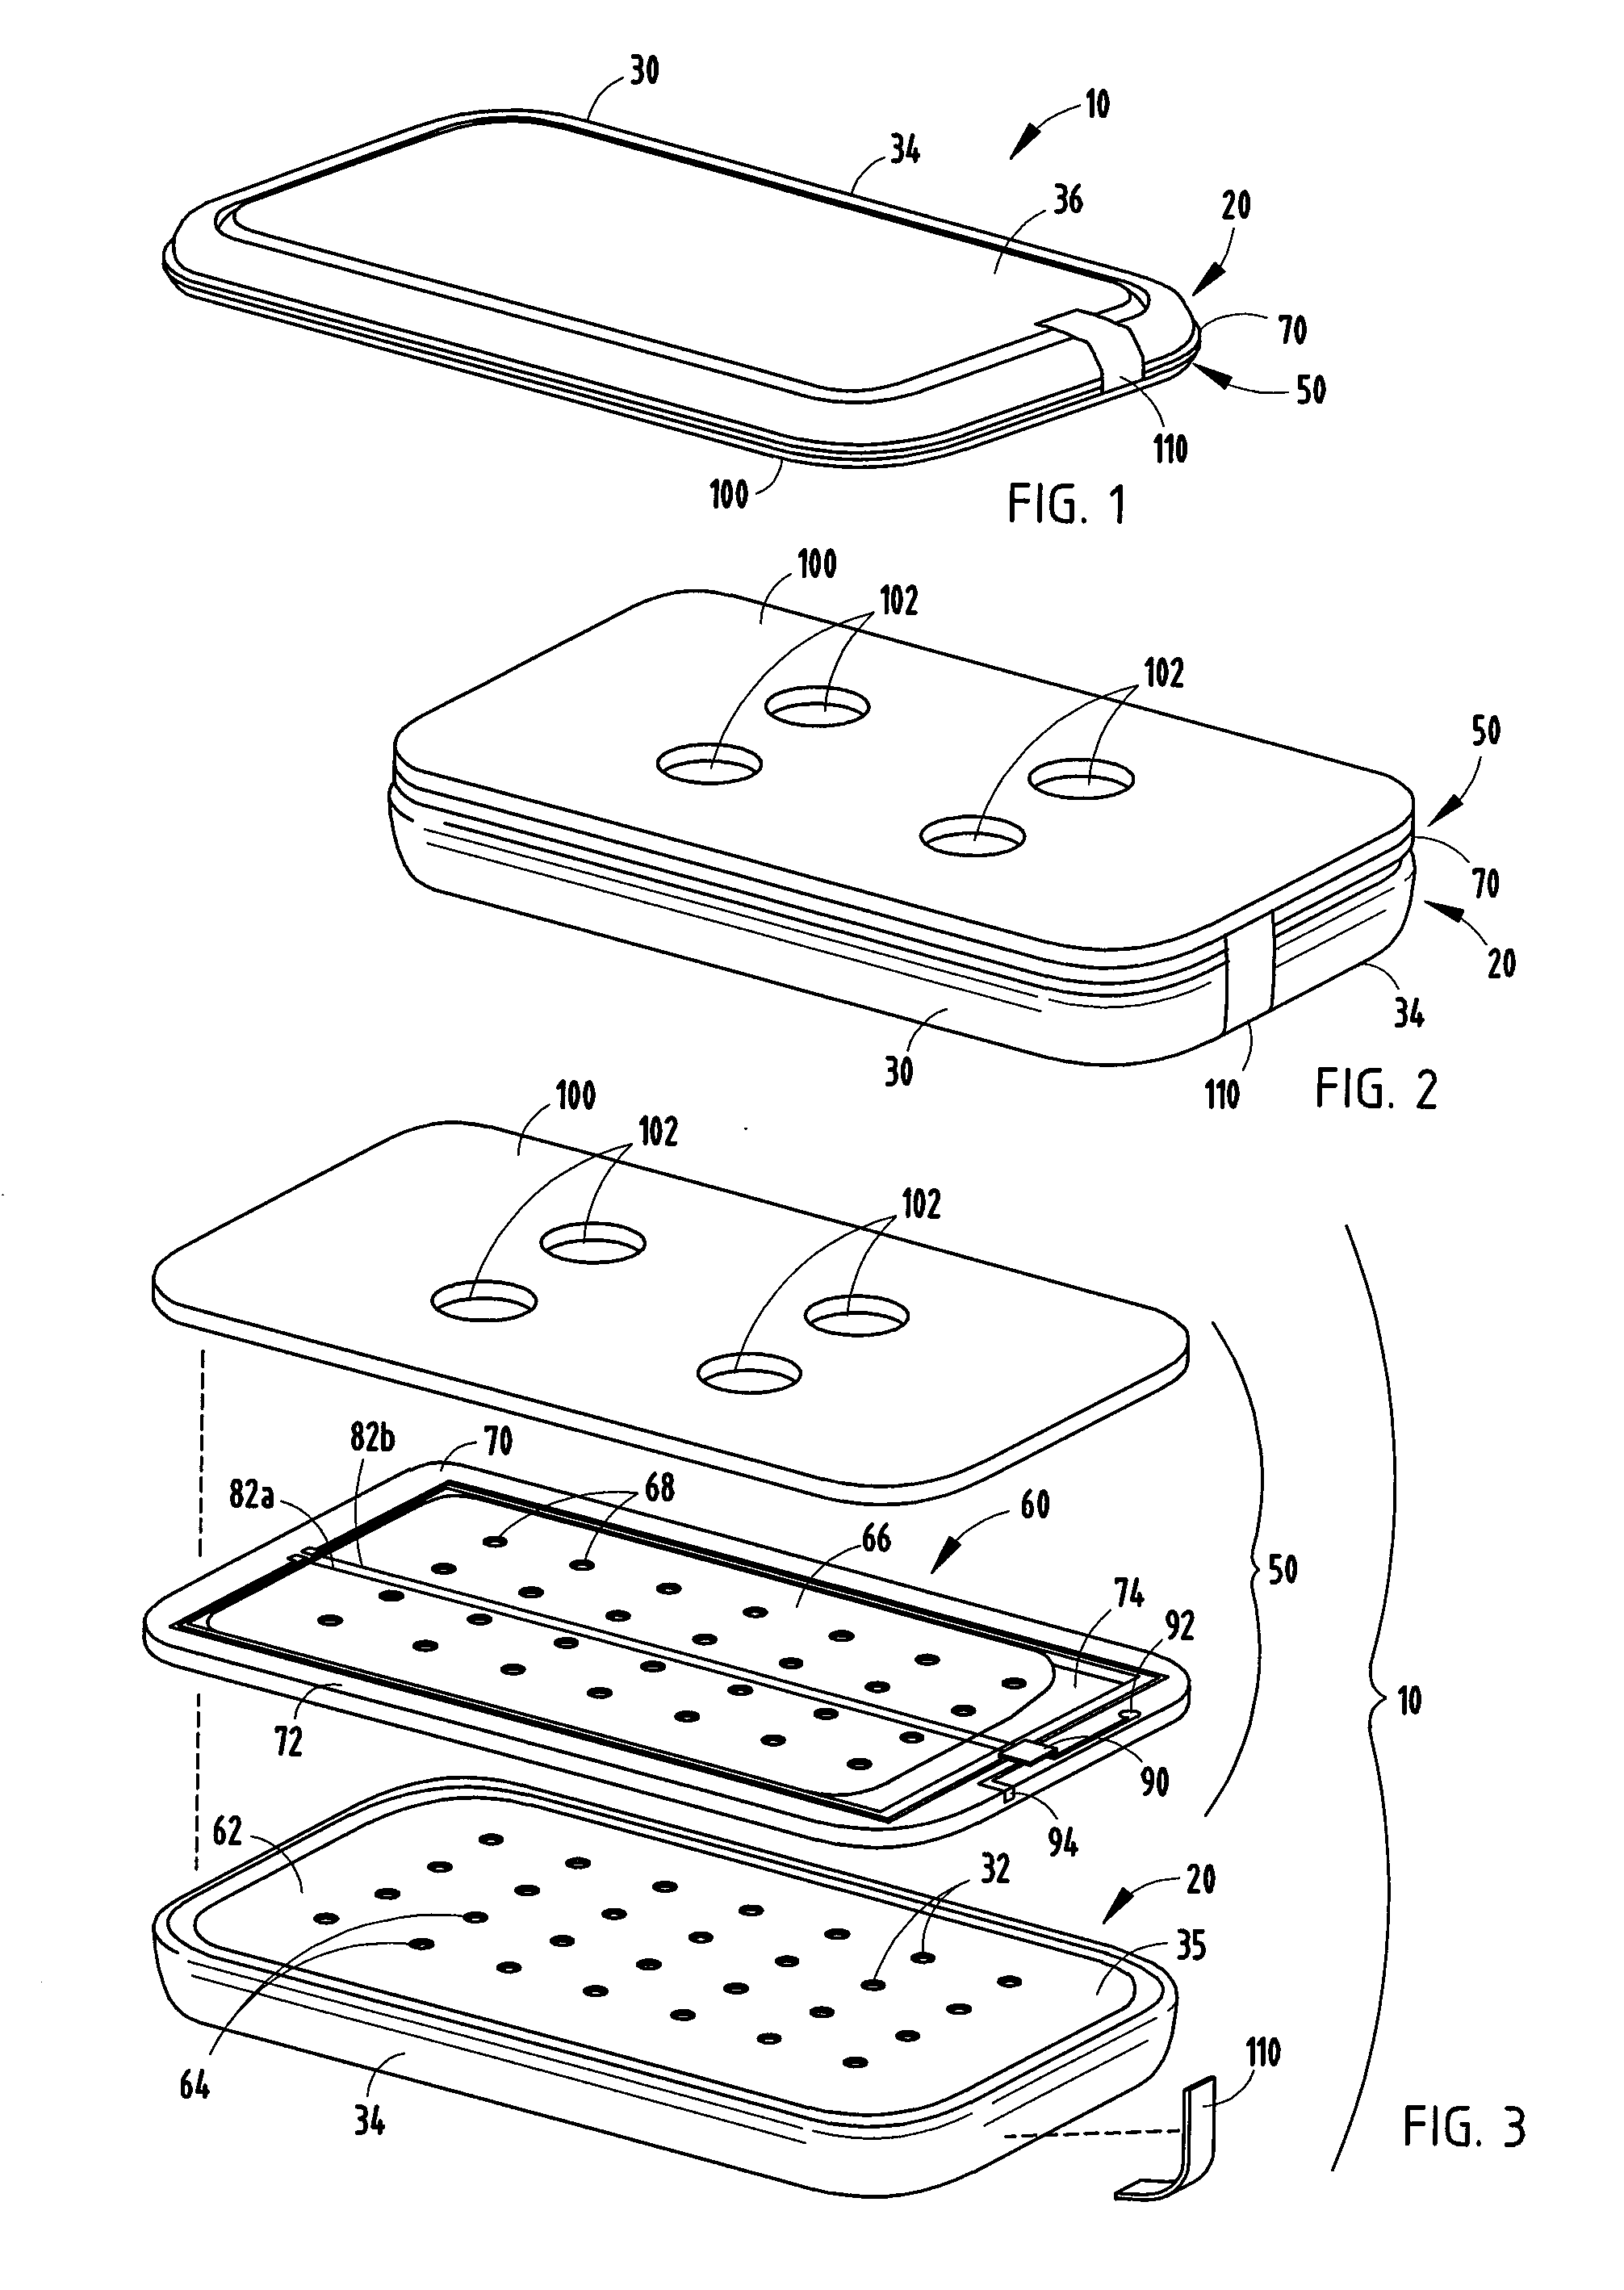 Battery Including a Fluid Manager Mounted Internal to Cell